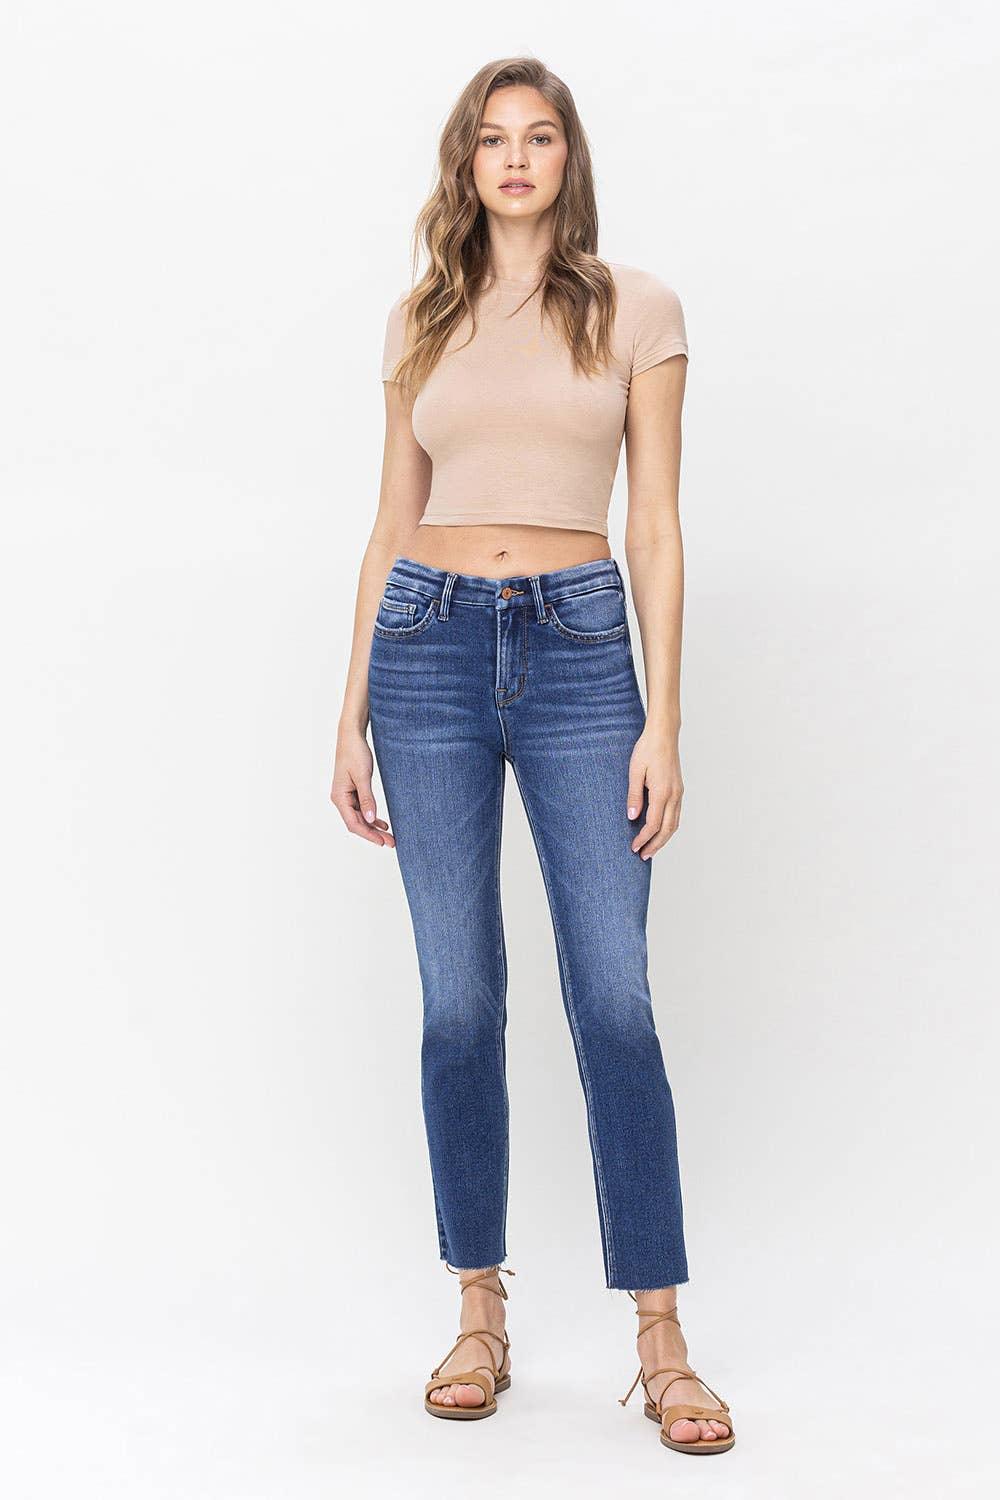 Flying Monkey By Vervet Slim Straight Jeans - Strawberry Moon Boutique